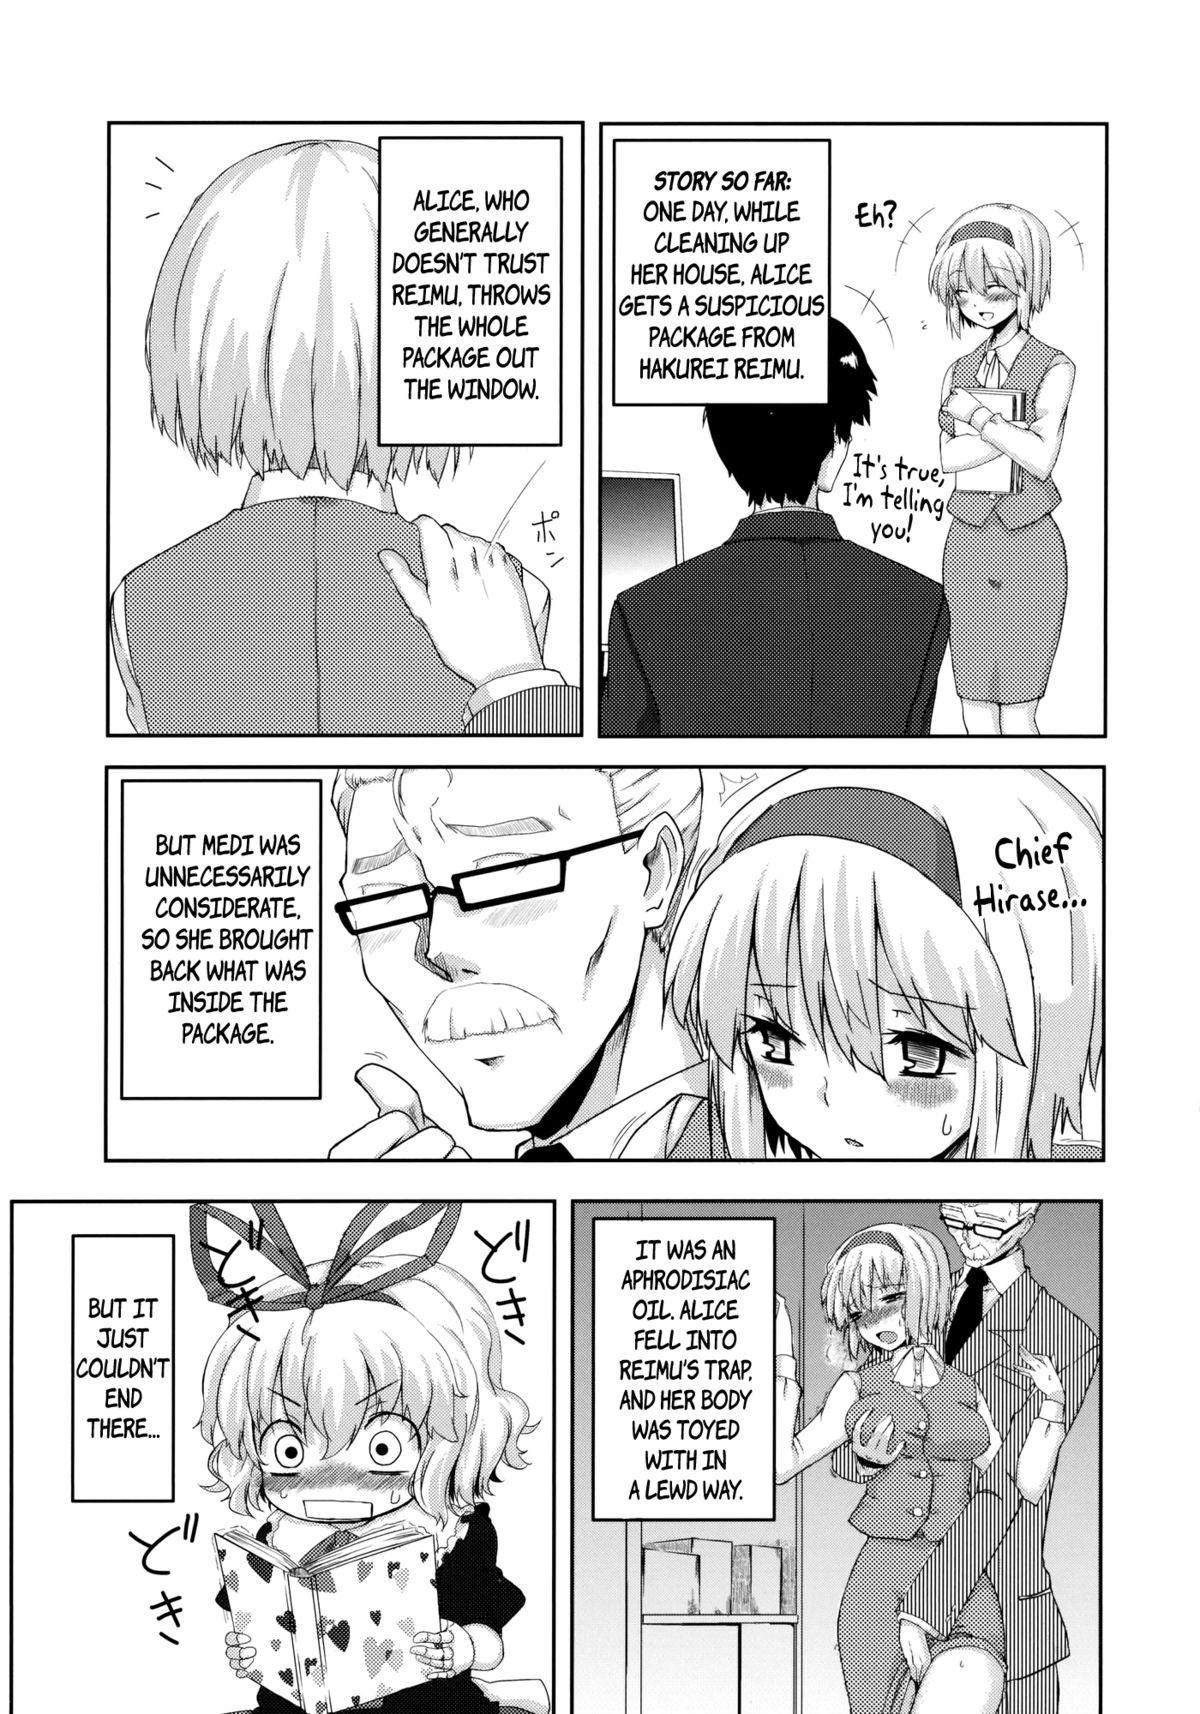 Asians (C78) [Jalapeno Chips (Uro)] Heart Potion (Touhou Project) [English] {pesu] - Touhou project Cheerleader - Page 3